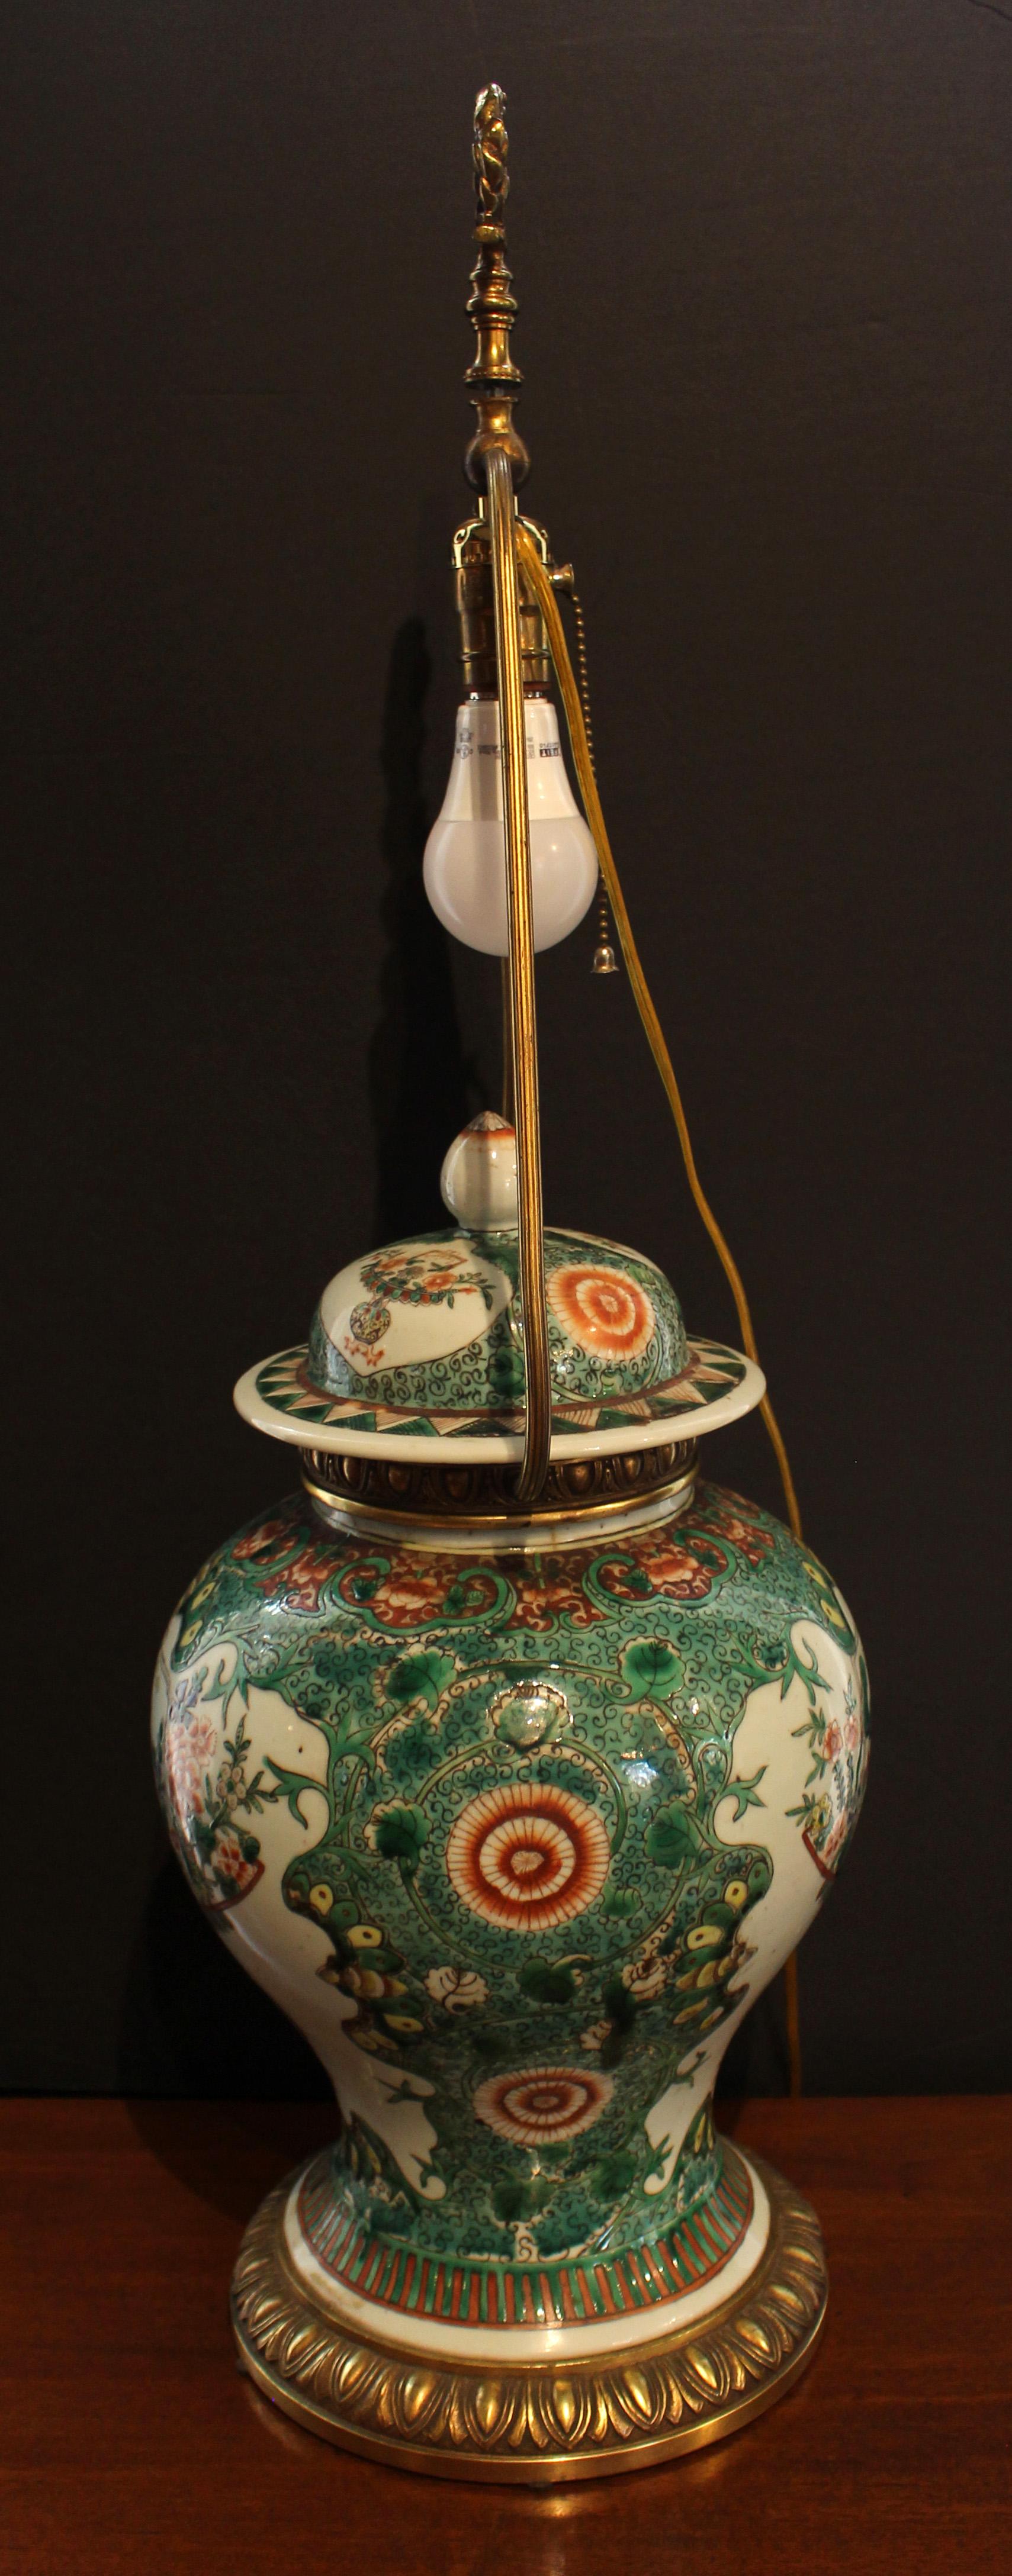 Late 19th century Chinese export famille verte temple jar, now mounted as a lamp. Baluster form with cover. Handsome bronze mounts. Qing dynasty. The bottom was shattered & mended but the entire body is unbroken. Finial reattached. The 1920s